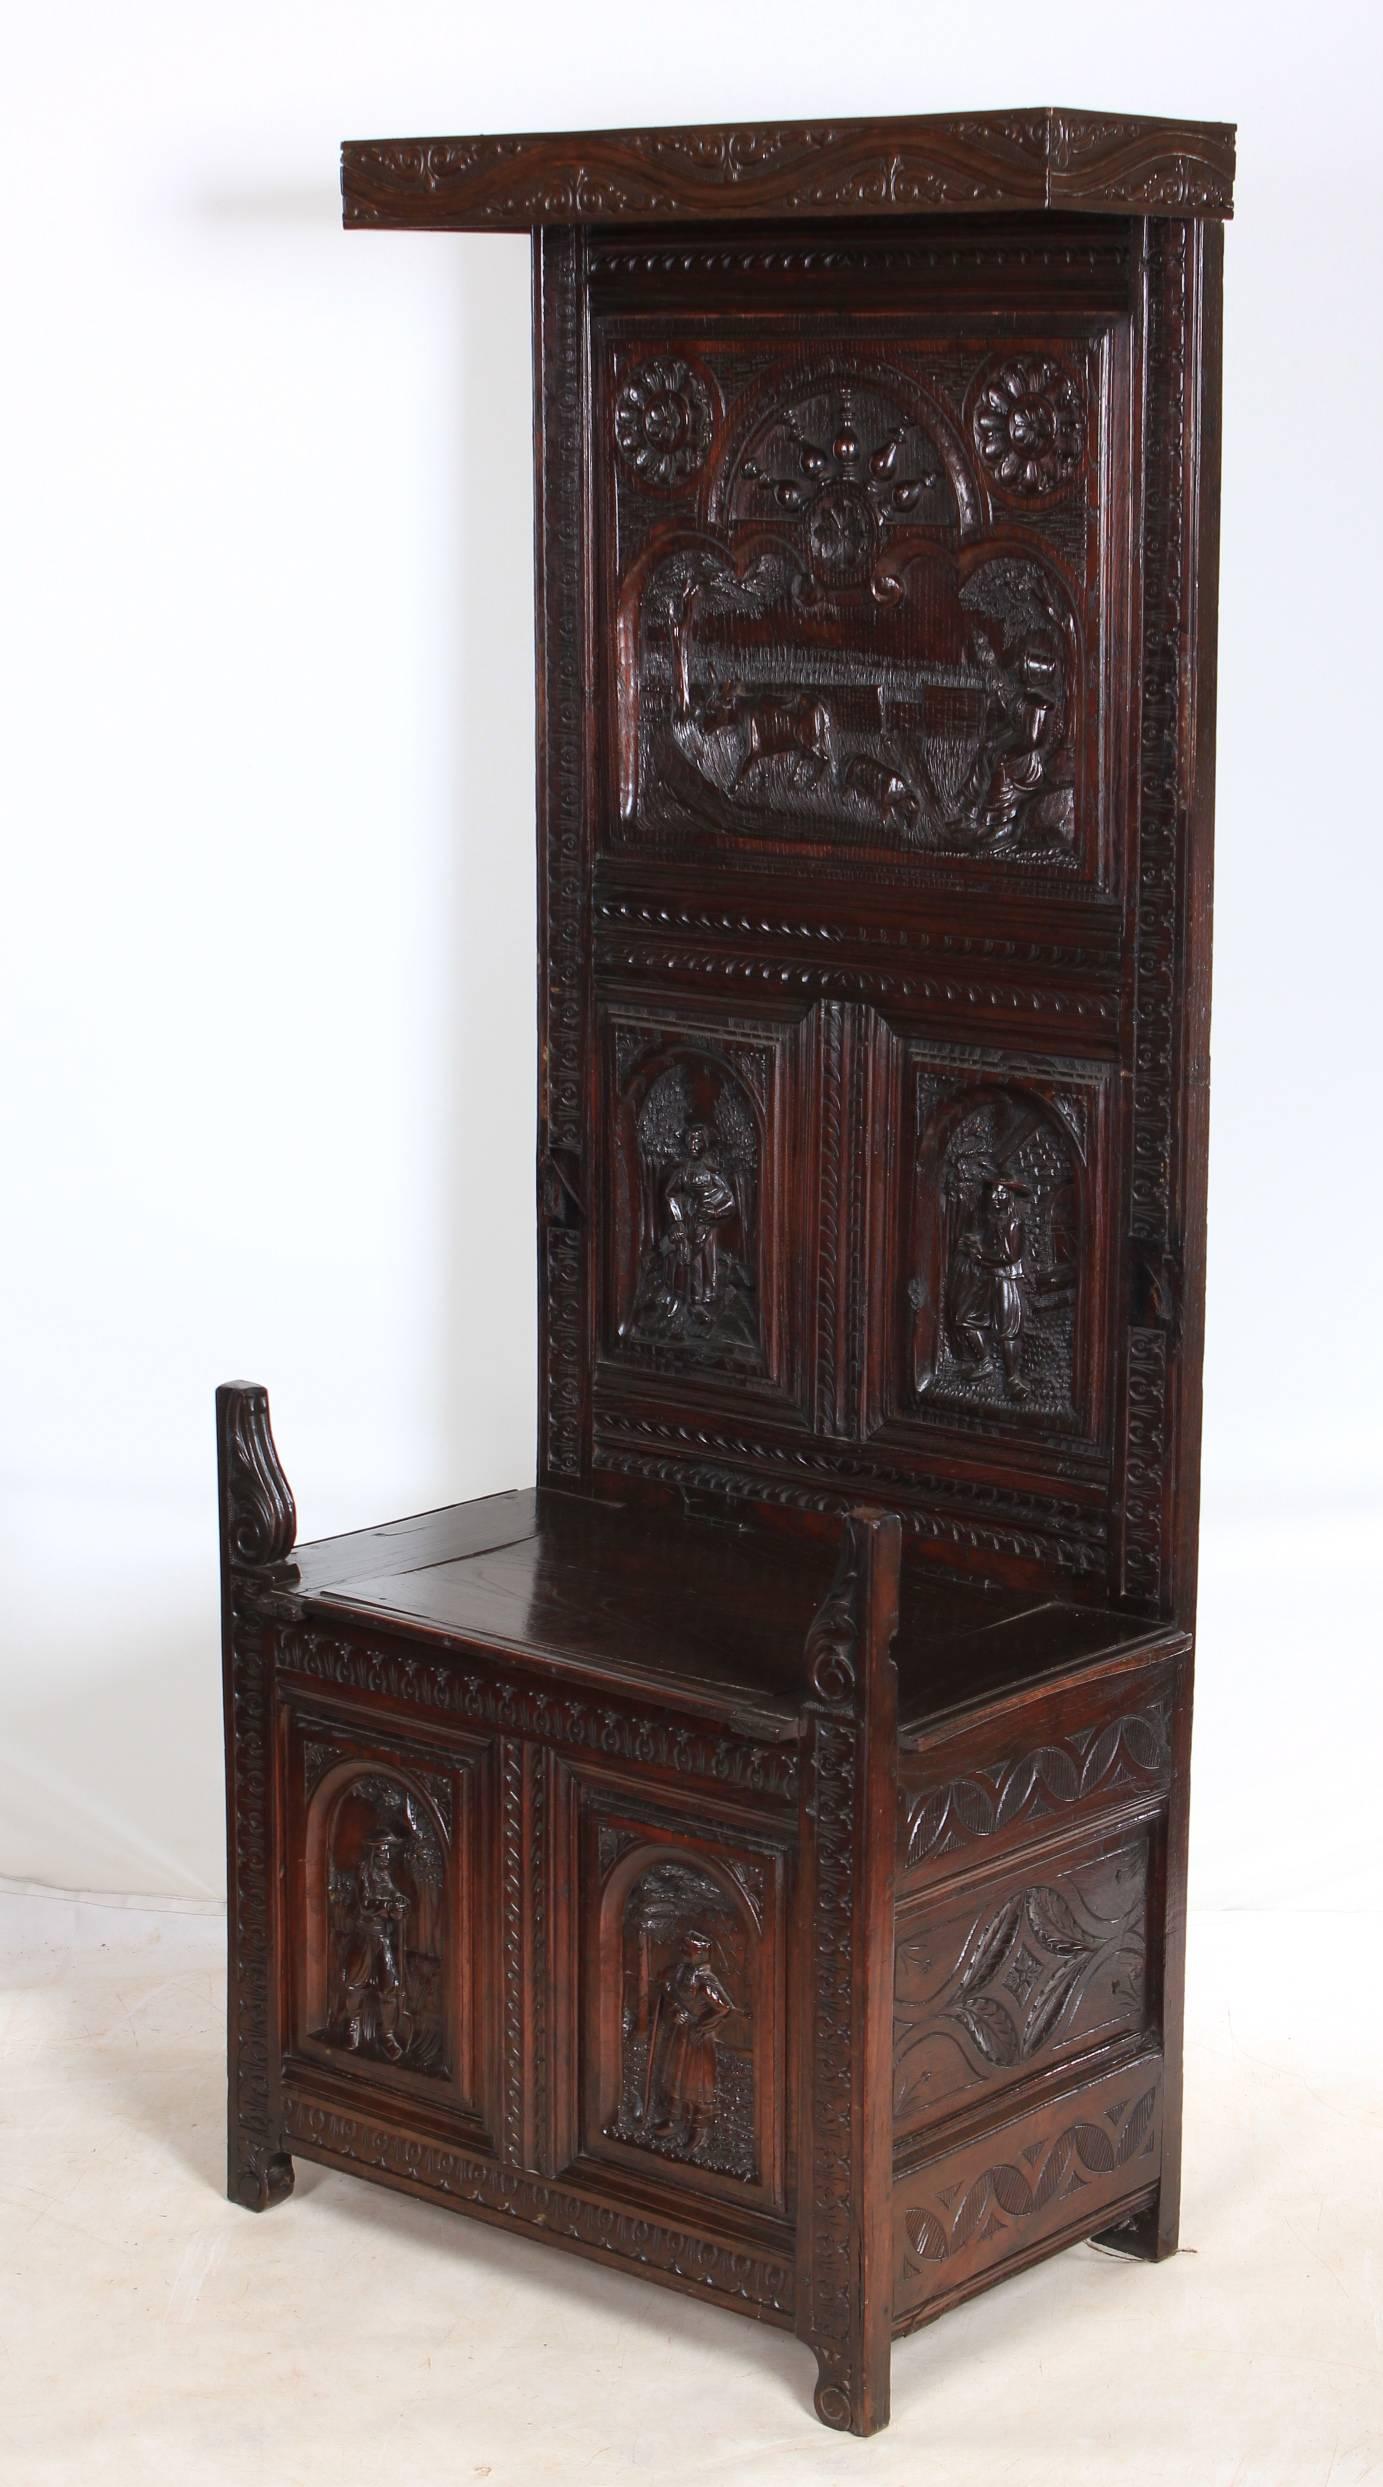 English, circa 1880.
This fantastic carved oak porters chair is in great condition. It is profusely carved all over, the back panel shows farmyard scenes and sits behind a box seat base.
The lid of the seat opens to reveal a storage